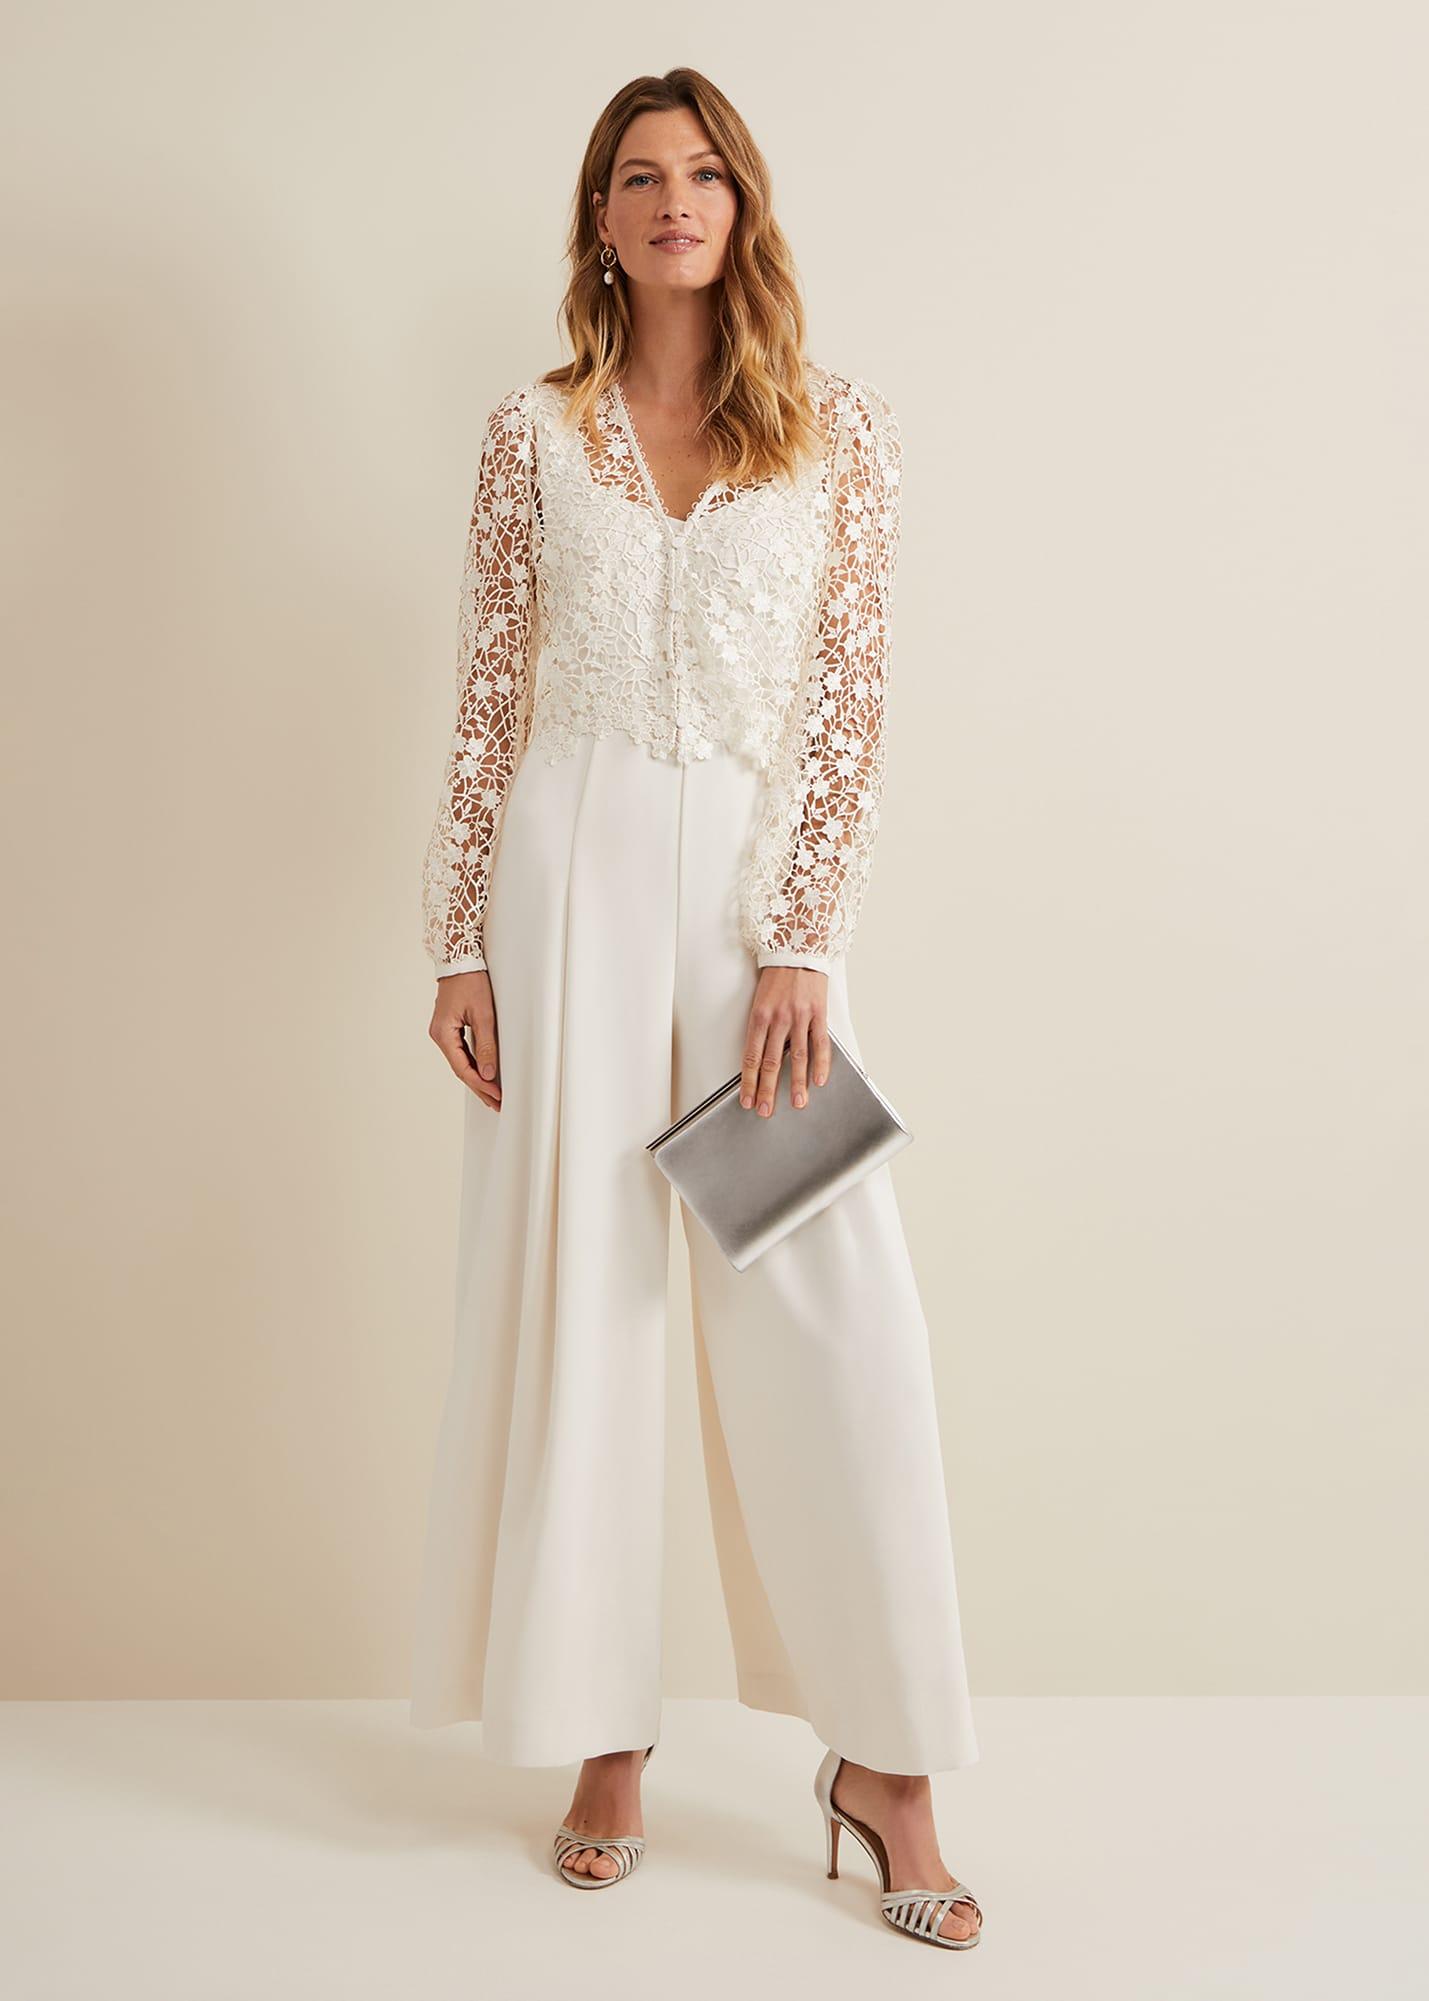 Phase Eight 's Mariposa Cream Lace Jumpsuit in Natural